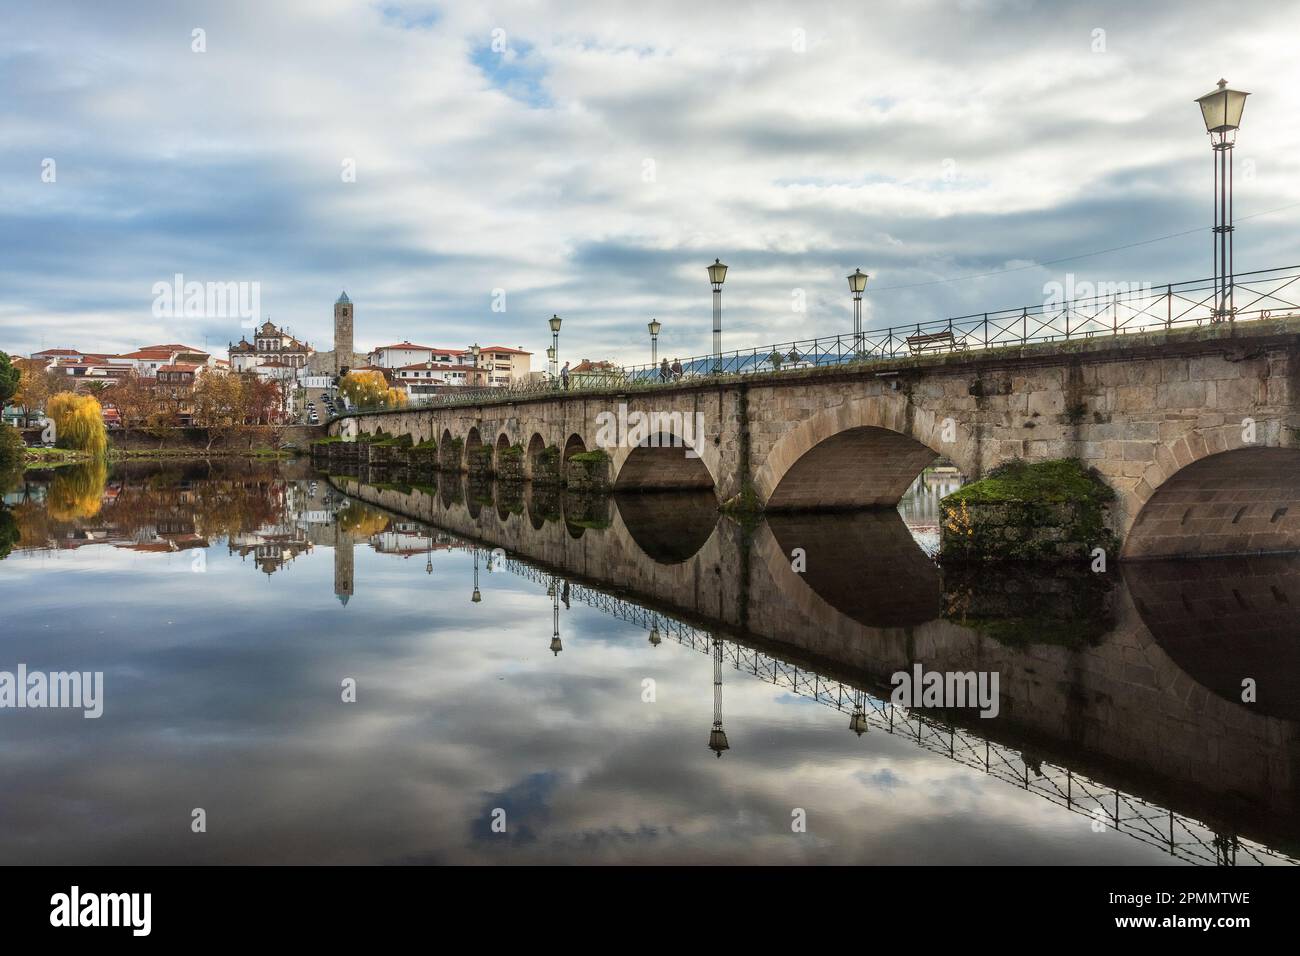 View of the city of Mirandela, Portugal, with the medieval bridge and the Tua river in the foreground, on a misty autumn morning. Stock Photo